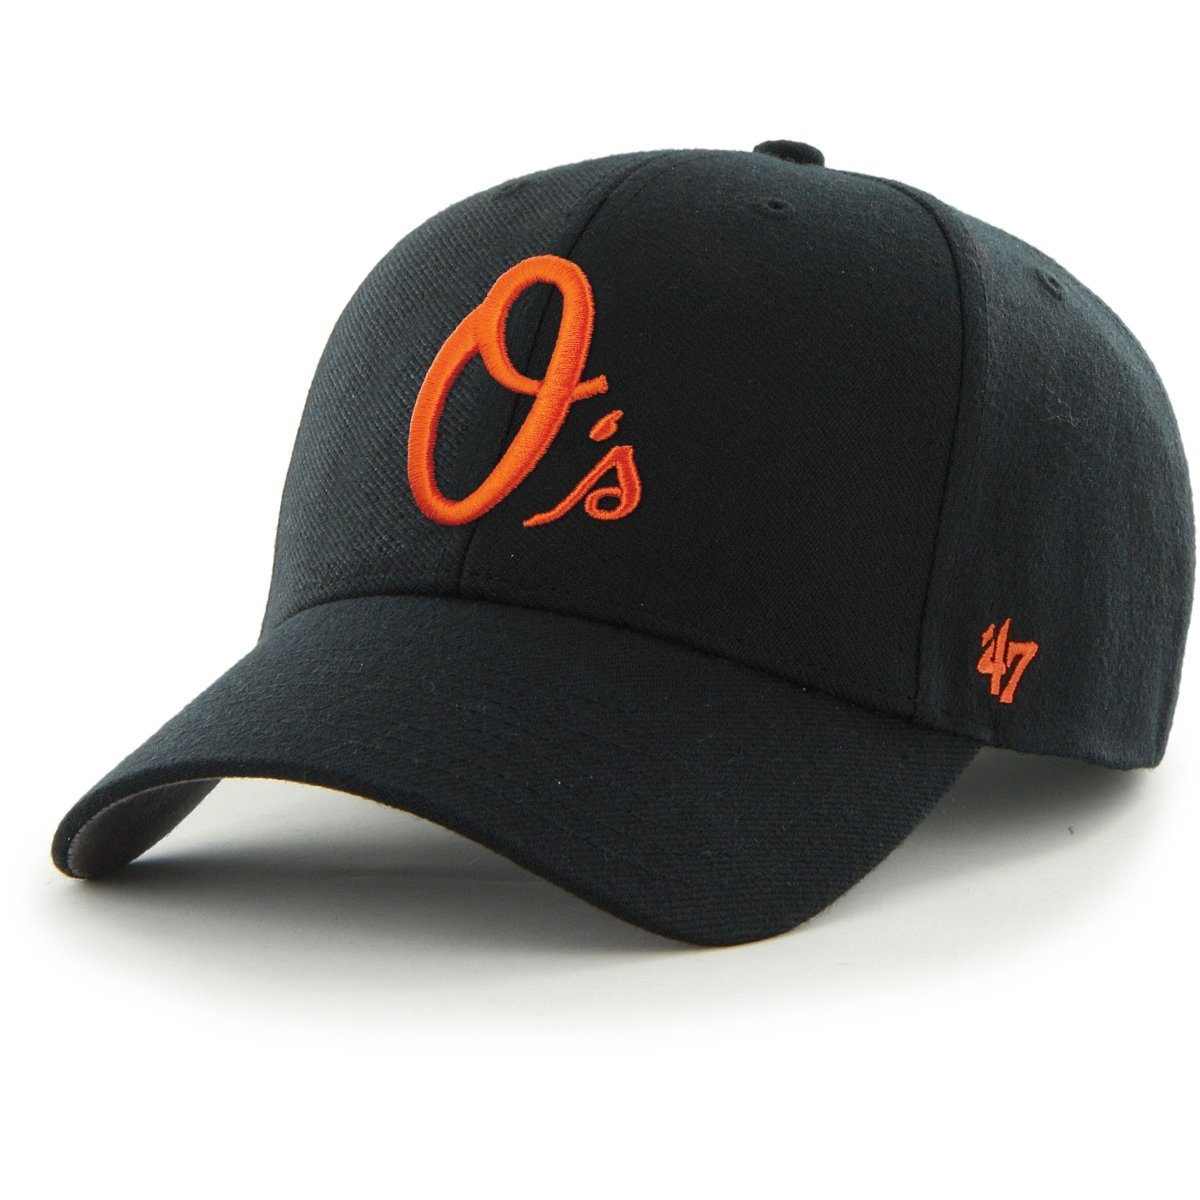 Orioles '47 Fit Brand Cap Trucker MLB Relaxed Baltimore